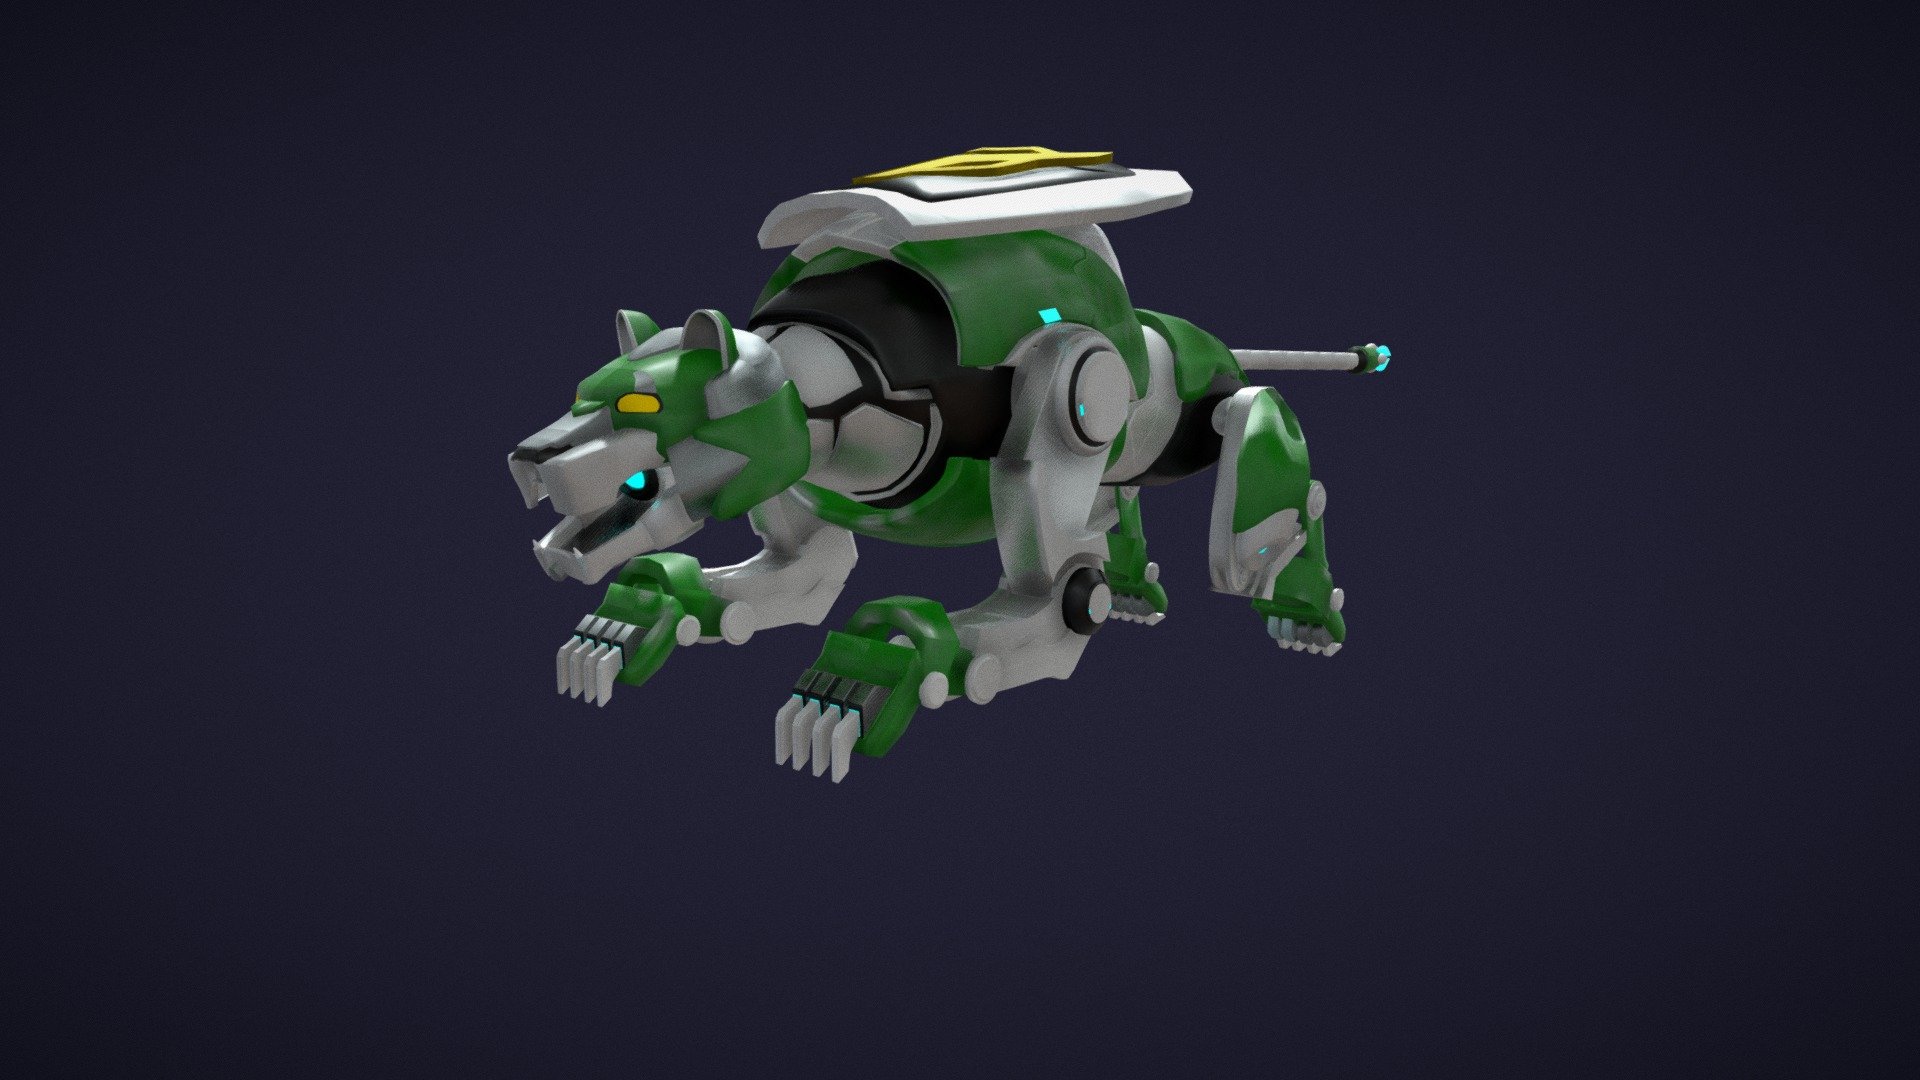 3D model from my favorite series and favorite character Pidge / Katie Holt from Voltron: Legendary Defender - Green Lion (Voltron Legendary Defender) - 3D model by TrzaskaKatarzyna 3d model